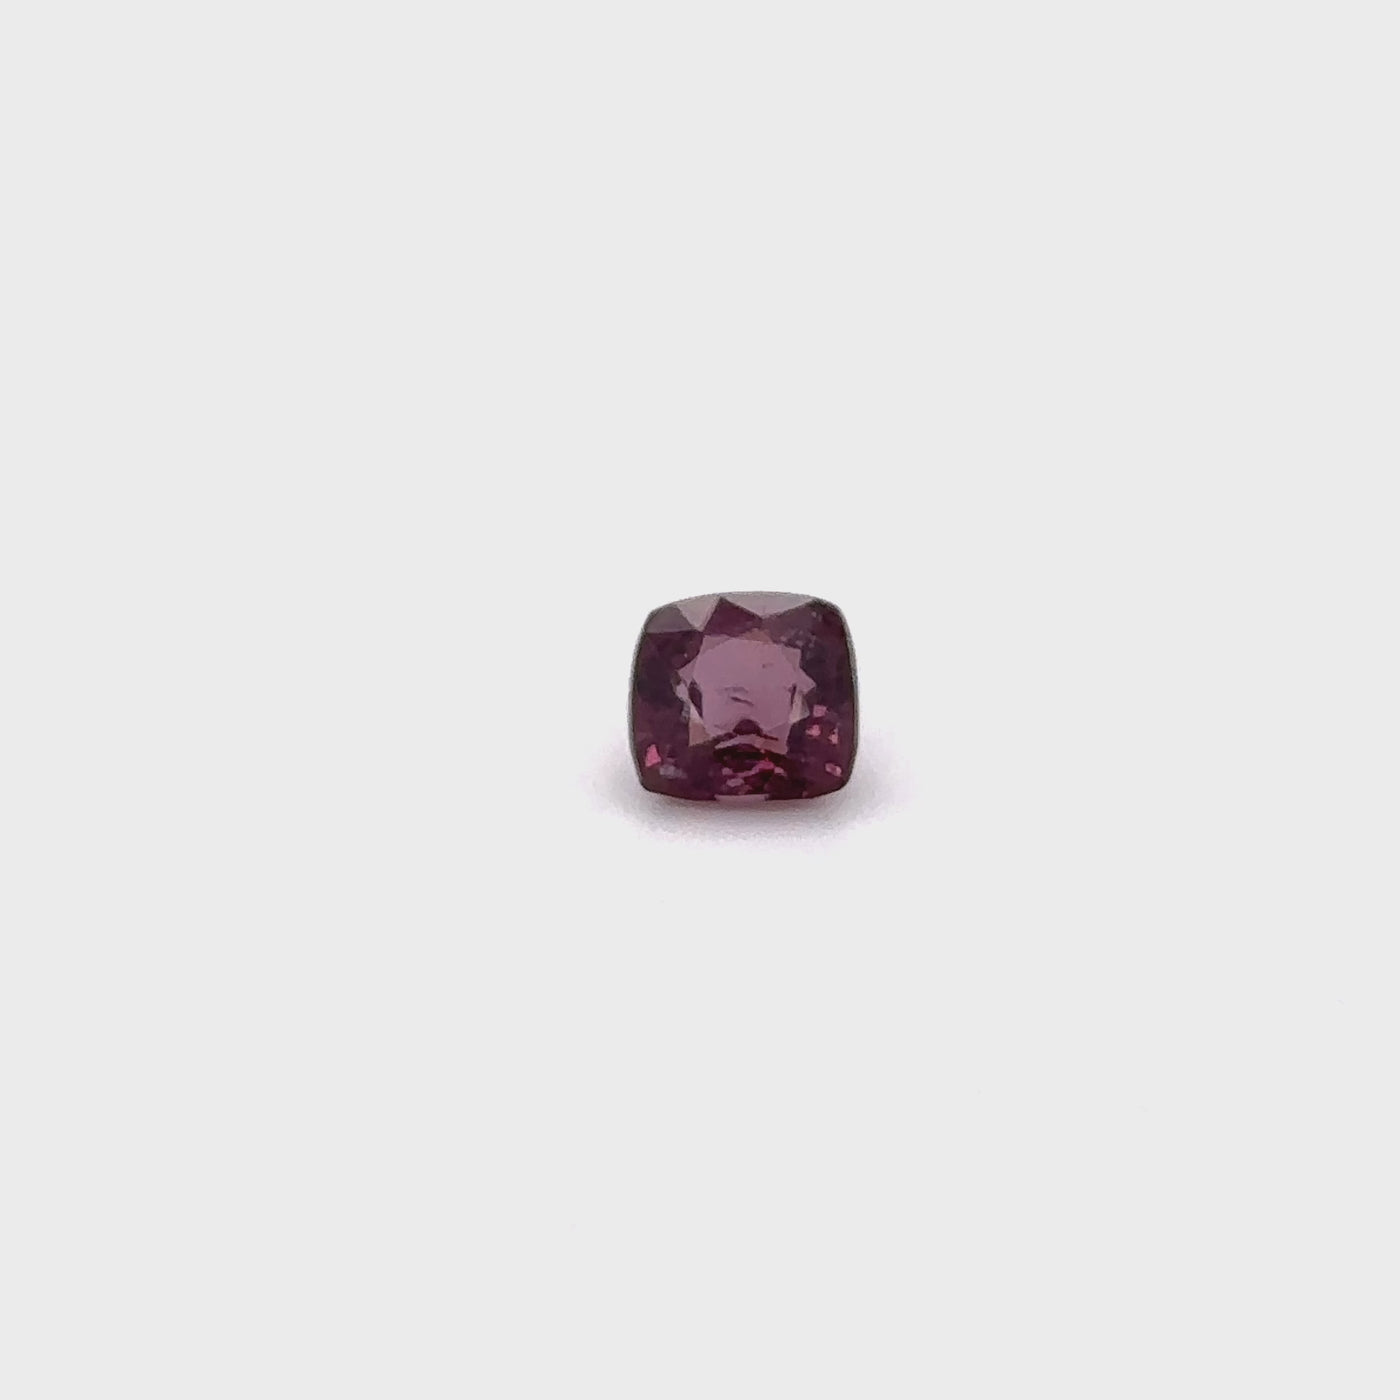 Spinelle violet 1.64 carats coussin